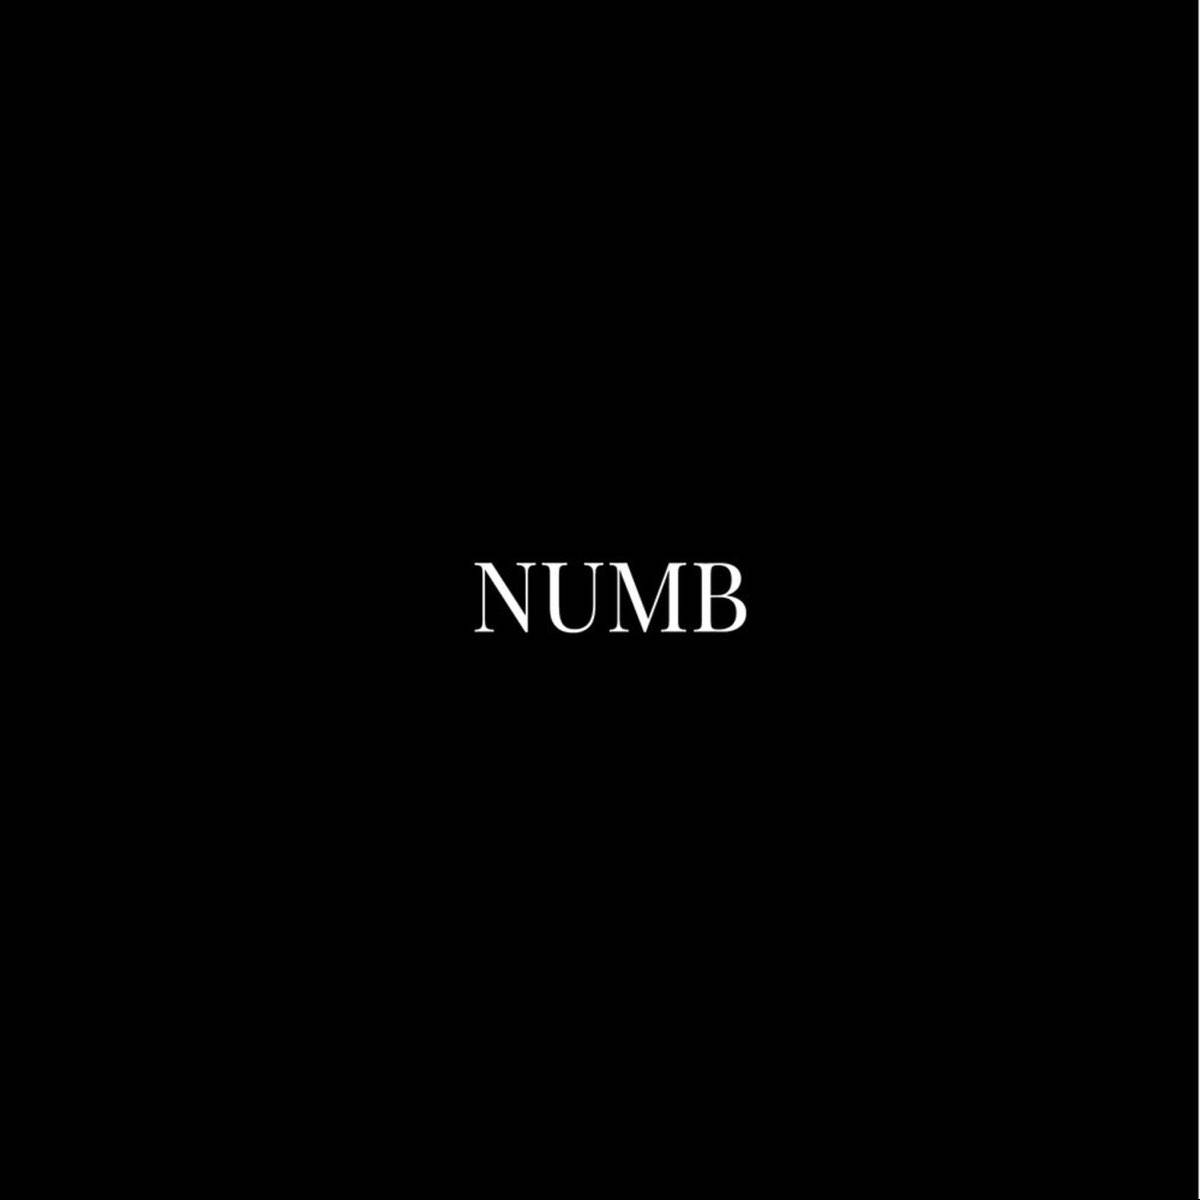 A Black Background With The Word Numb